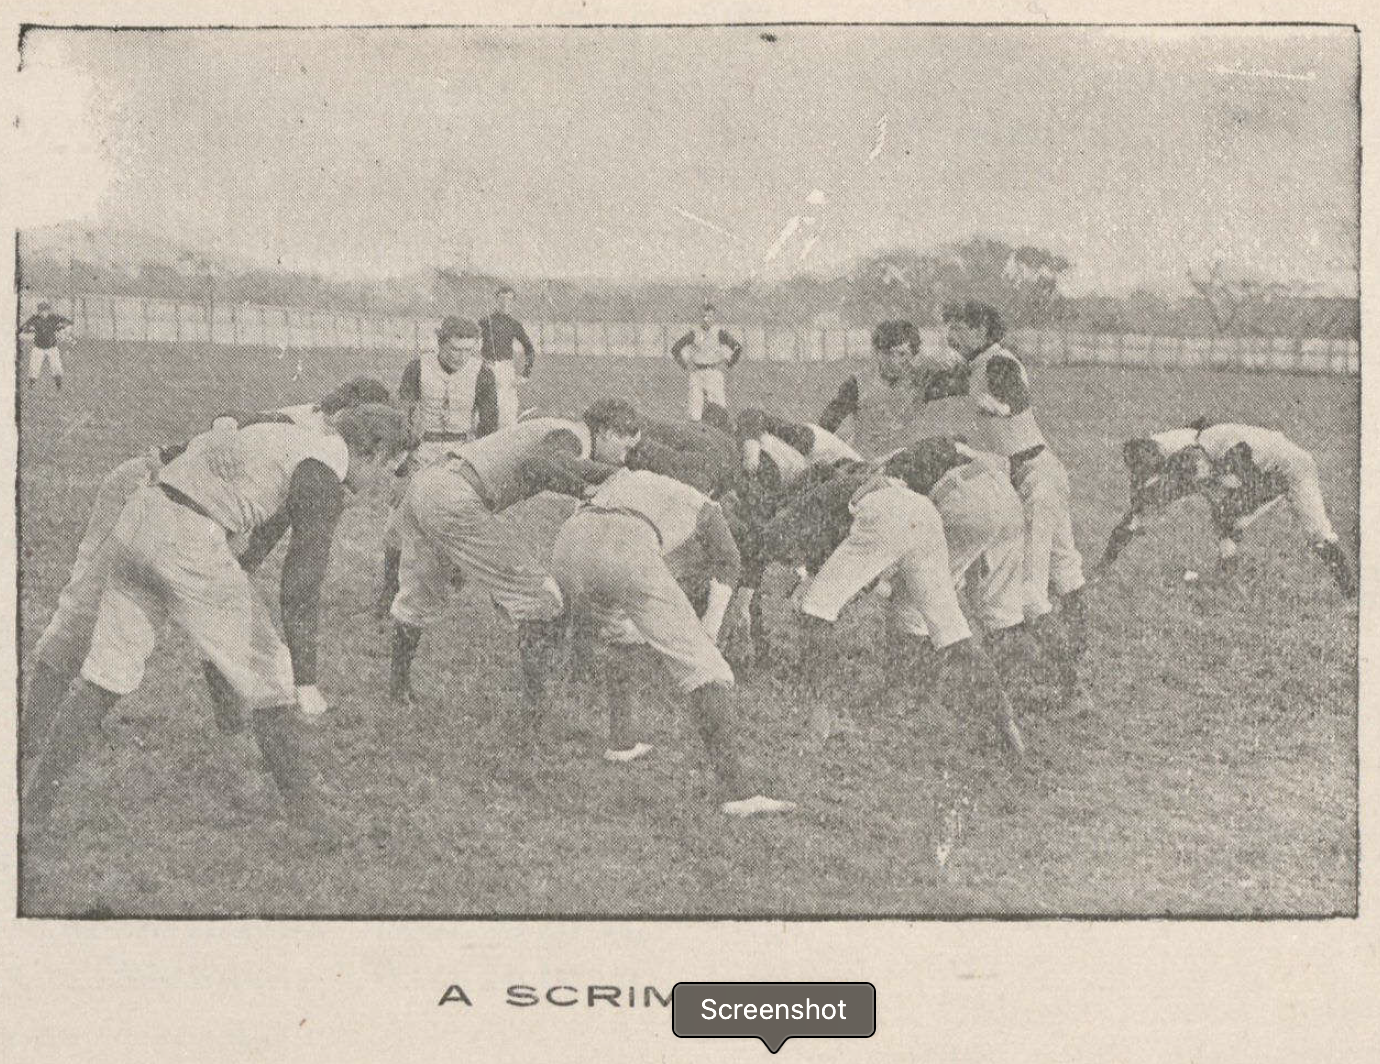 A group of football players in uniform on the field, playing football. Text below reads "A scrimmage."